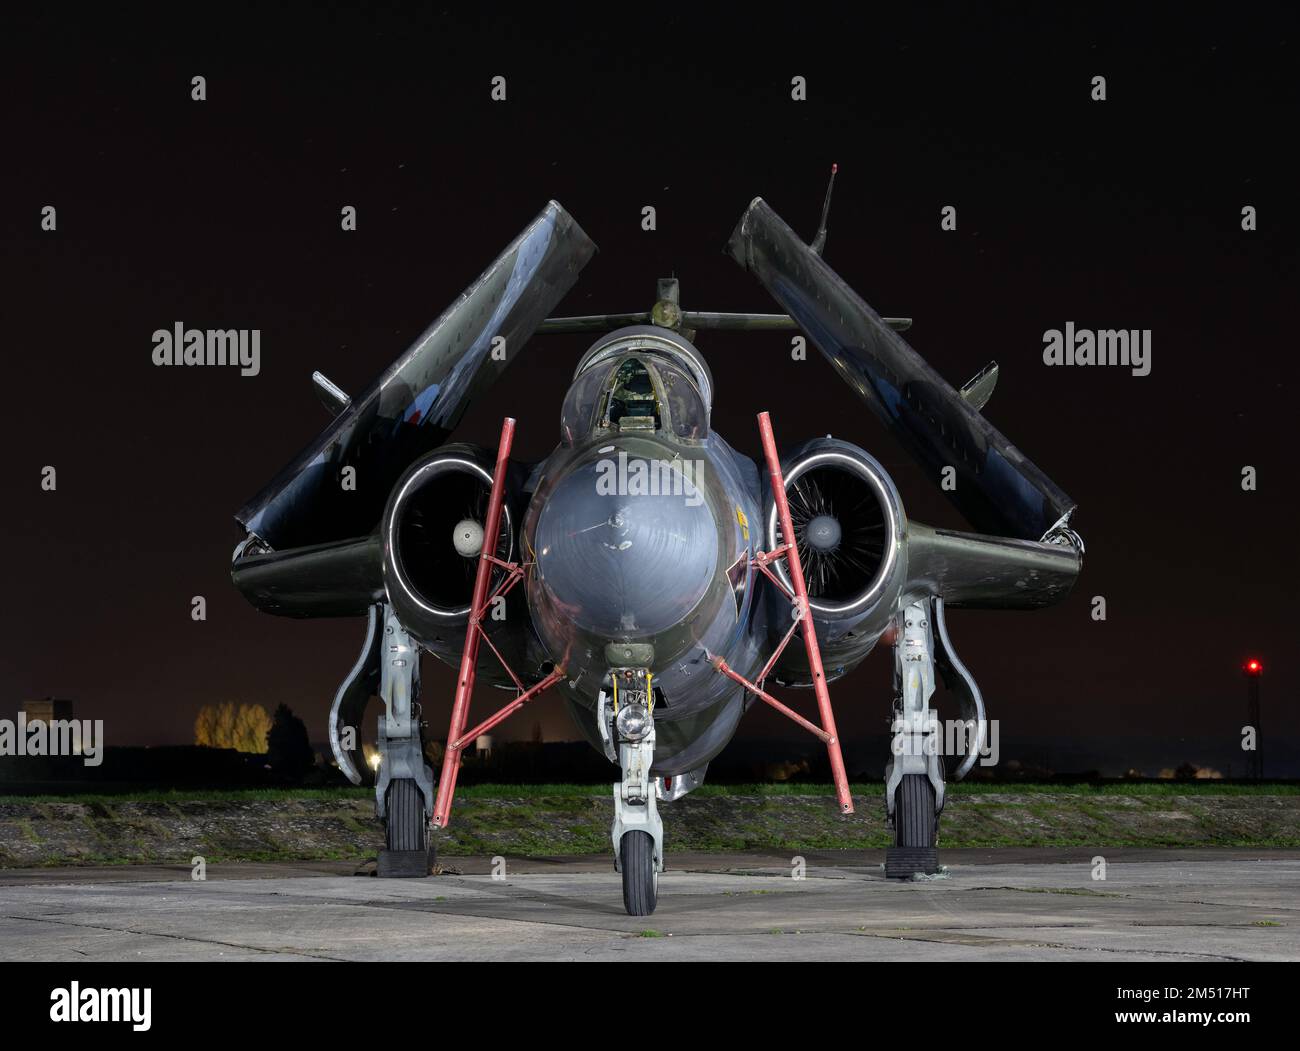 Buccaneer from The Buccaneer Aviation Group during a night photography shoot at Cotswold Airport Stock Photo